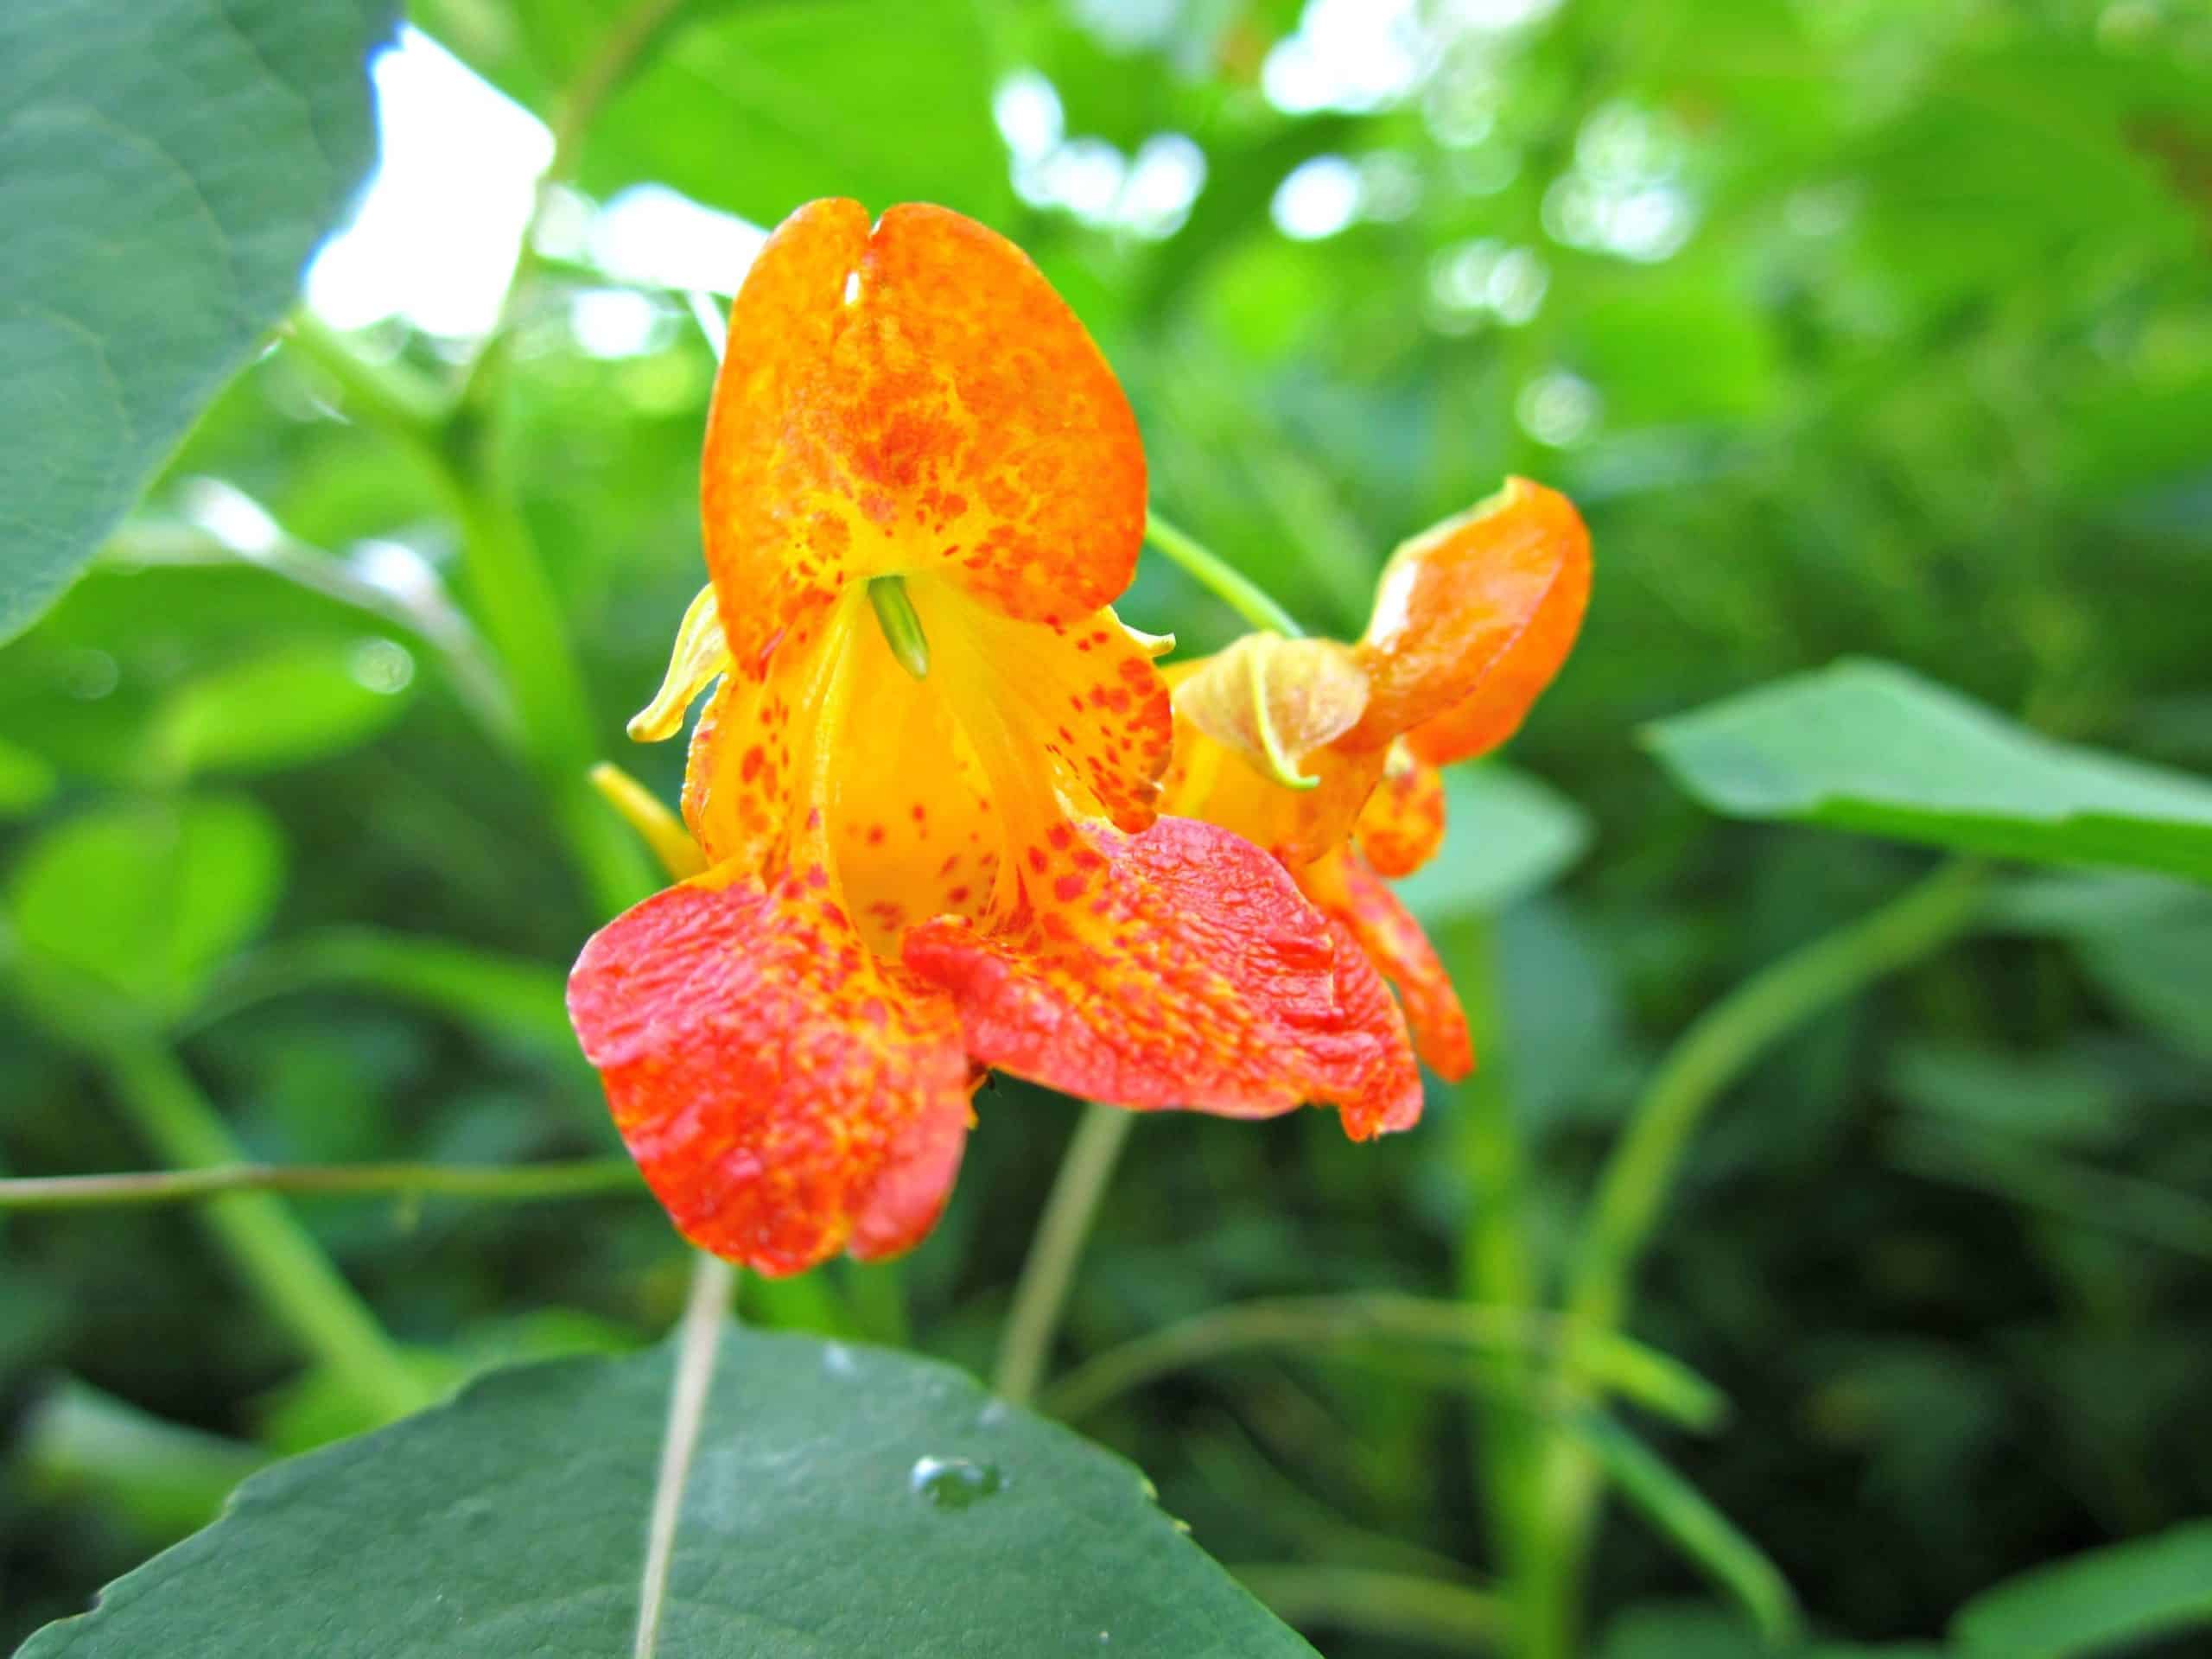 Jewelweed (Impatiens capensis)
